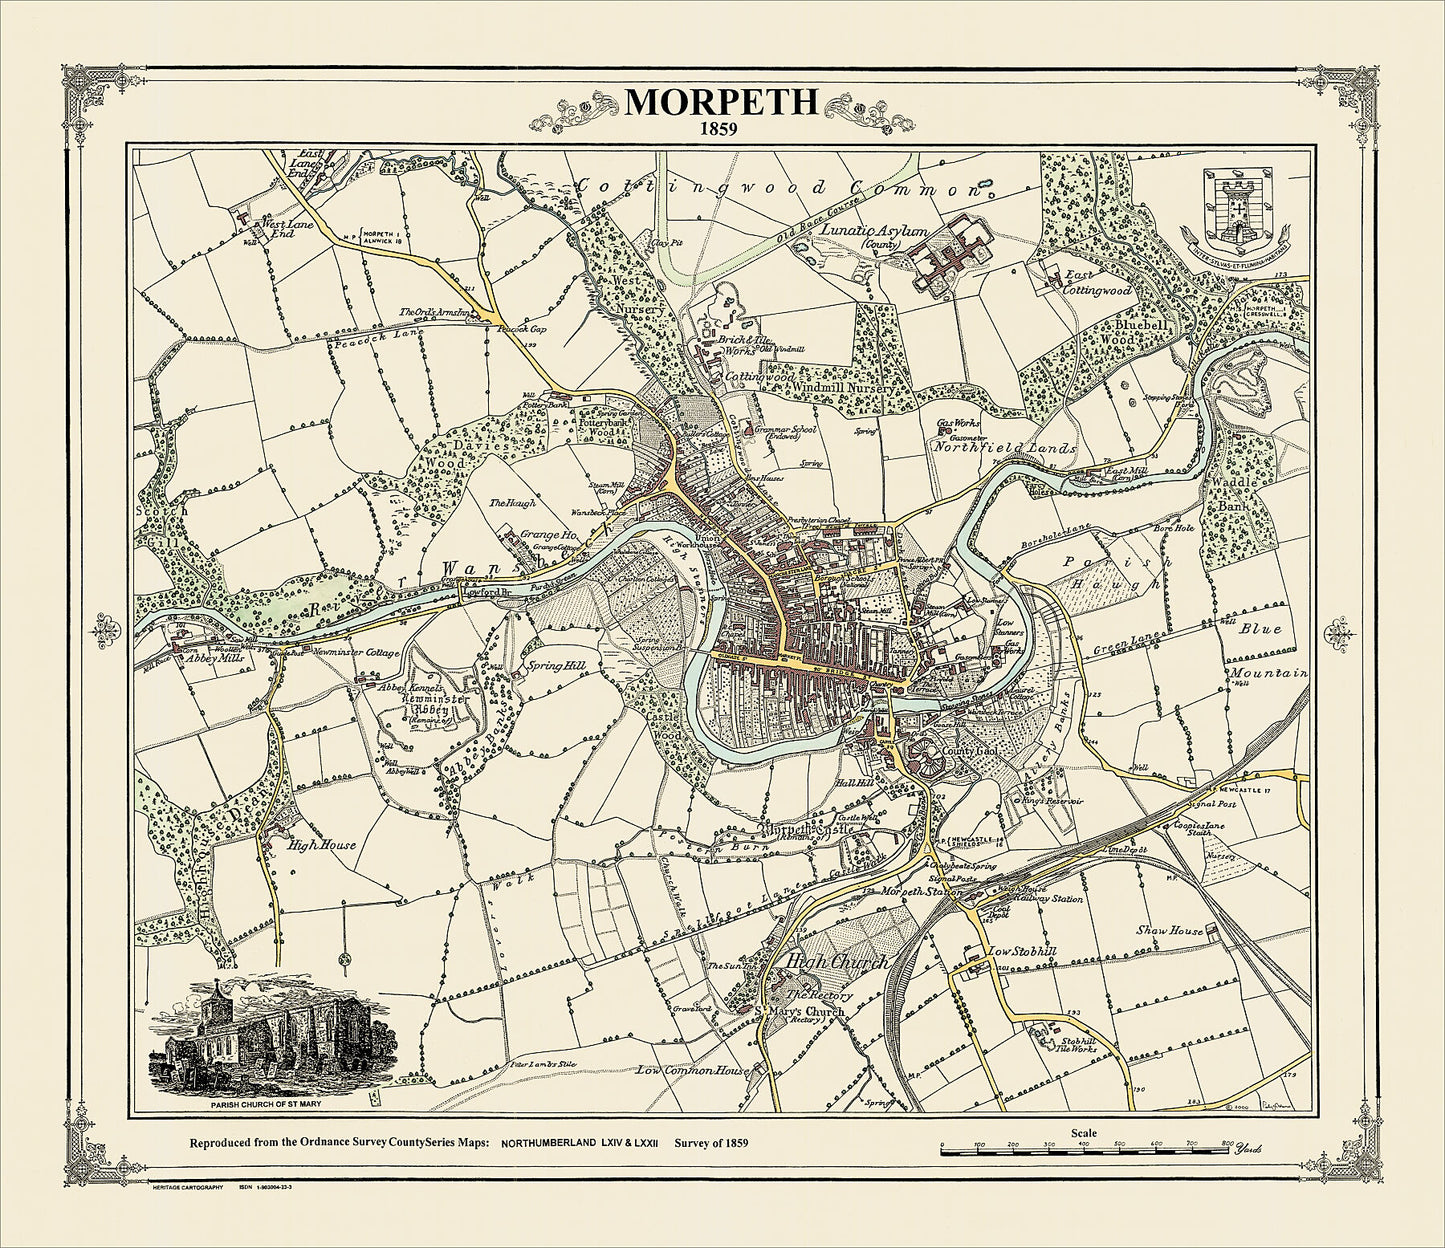 Coloured Victorian map of Morpeth in 1859 by Peter J Adams of Heritage Cartography